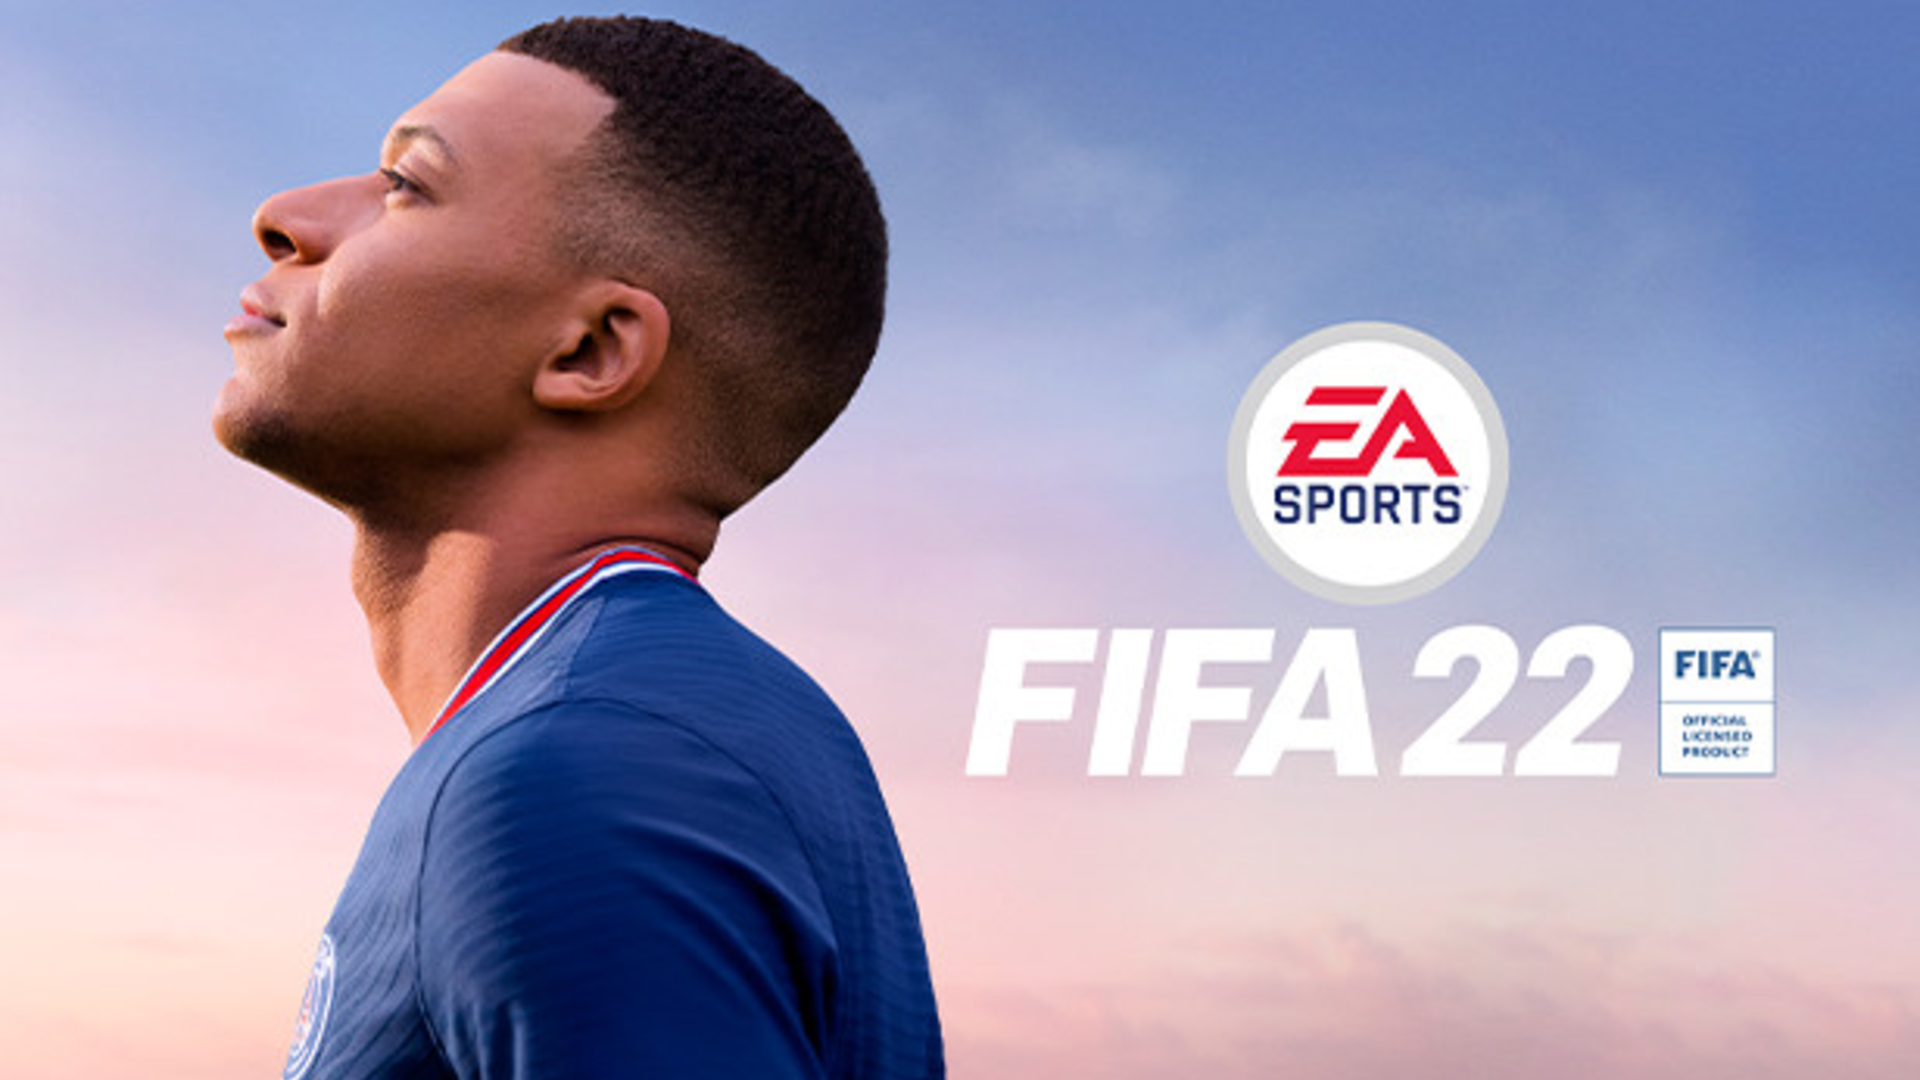 ea fifa 22 cover kylian mbappe 1qeaco87s803l13iu0tnr84jhq - PPSSPP Games Highly Compressed (Top 35 Games)